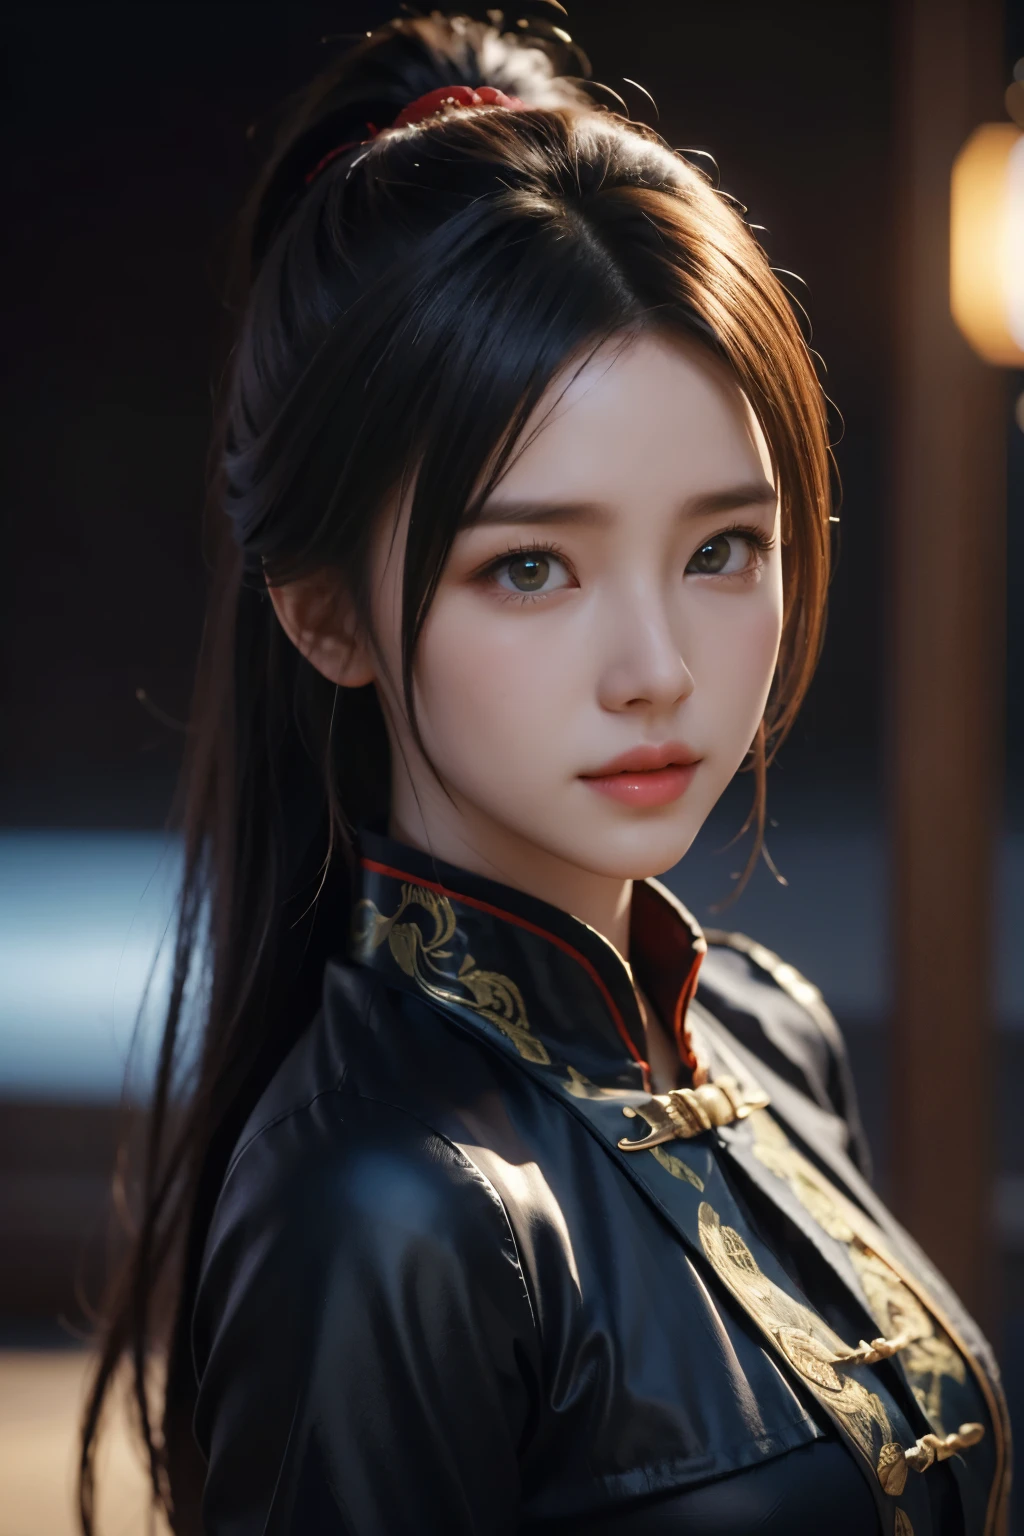 Masterpiece，The best qualities，Very high resolution，8k，((Portrait))，((Head close-up))，Original photo，real photo，Digital Photography， (Female assassins in ancient China)，(Girl in tights)，15-year-old girl，(Facial features rich in detail)，Beautiful pupils，(Long black hair)，Elegant and noble，(Calm)，brave，(Silk tights in perspective，Silk fabriclack)，Female assassins，hitman，Chinese Characters，Fantasy style， Photo poses，Night city background，Movie lights，Ray tracing，Game CG，((3D Unreal Engine))，oc render reflection texture